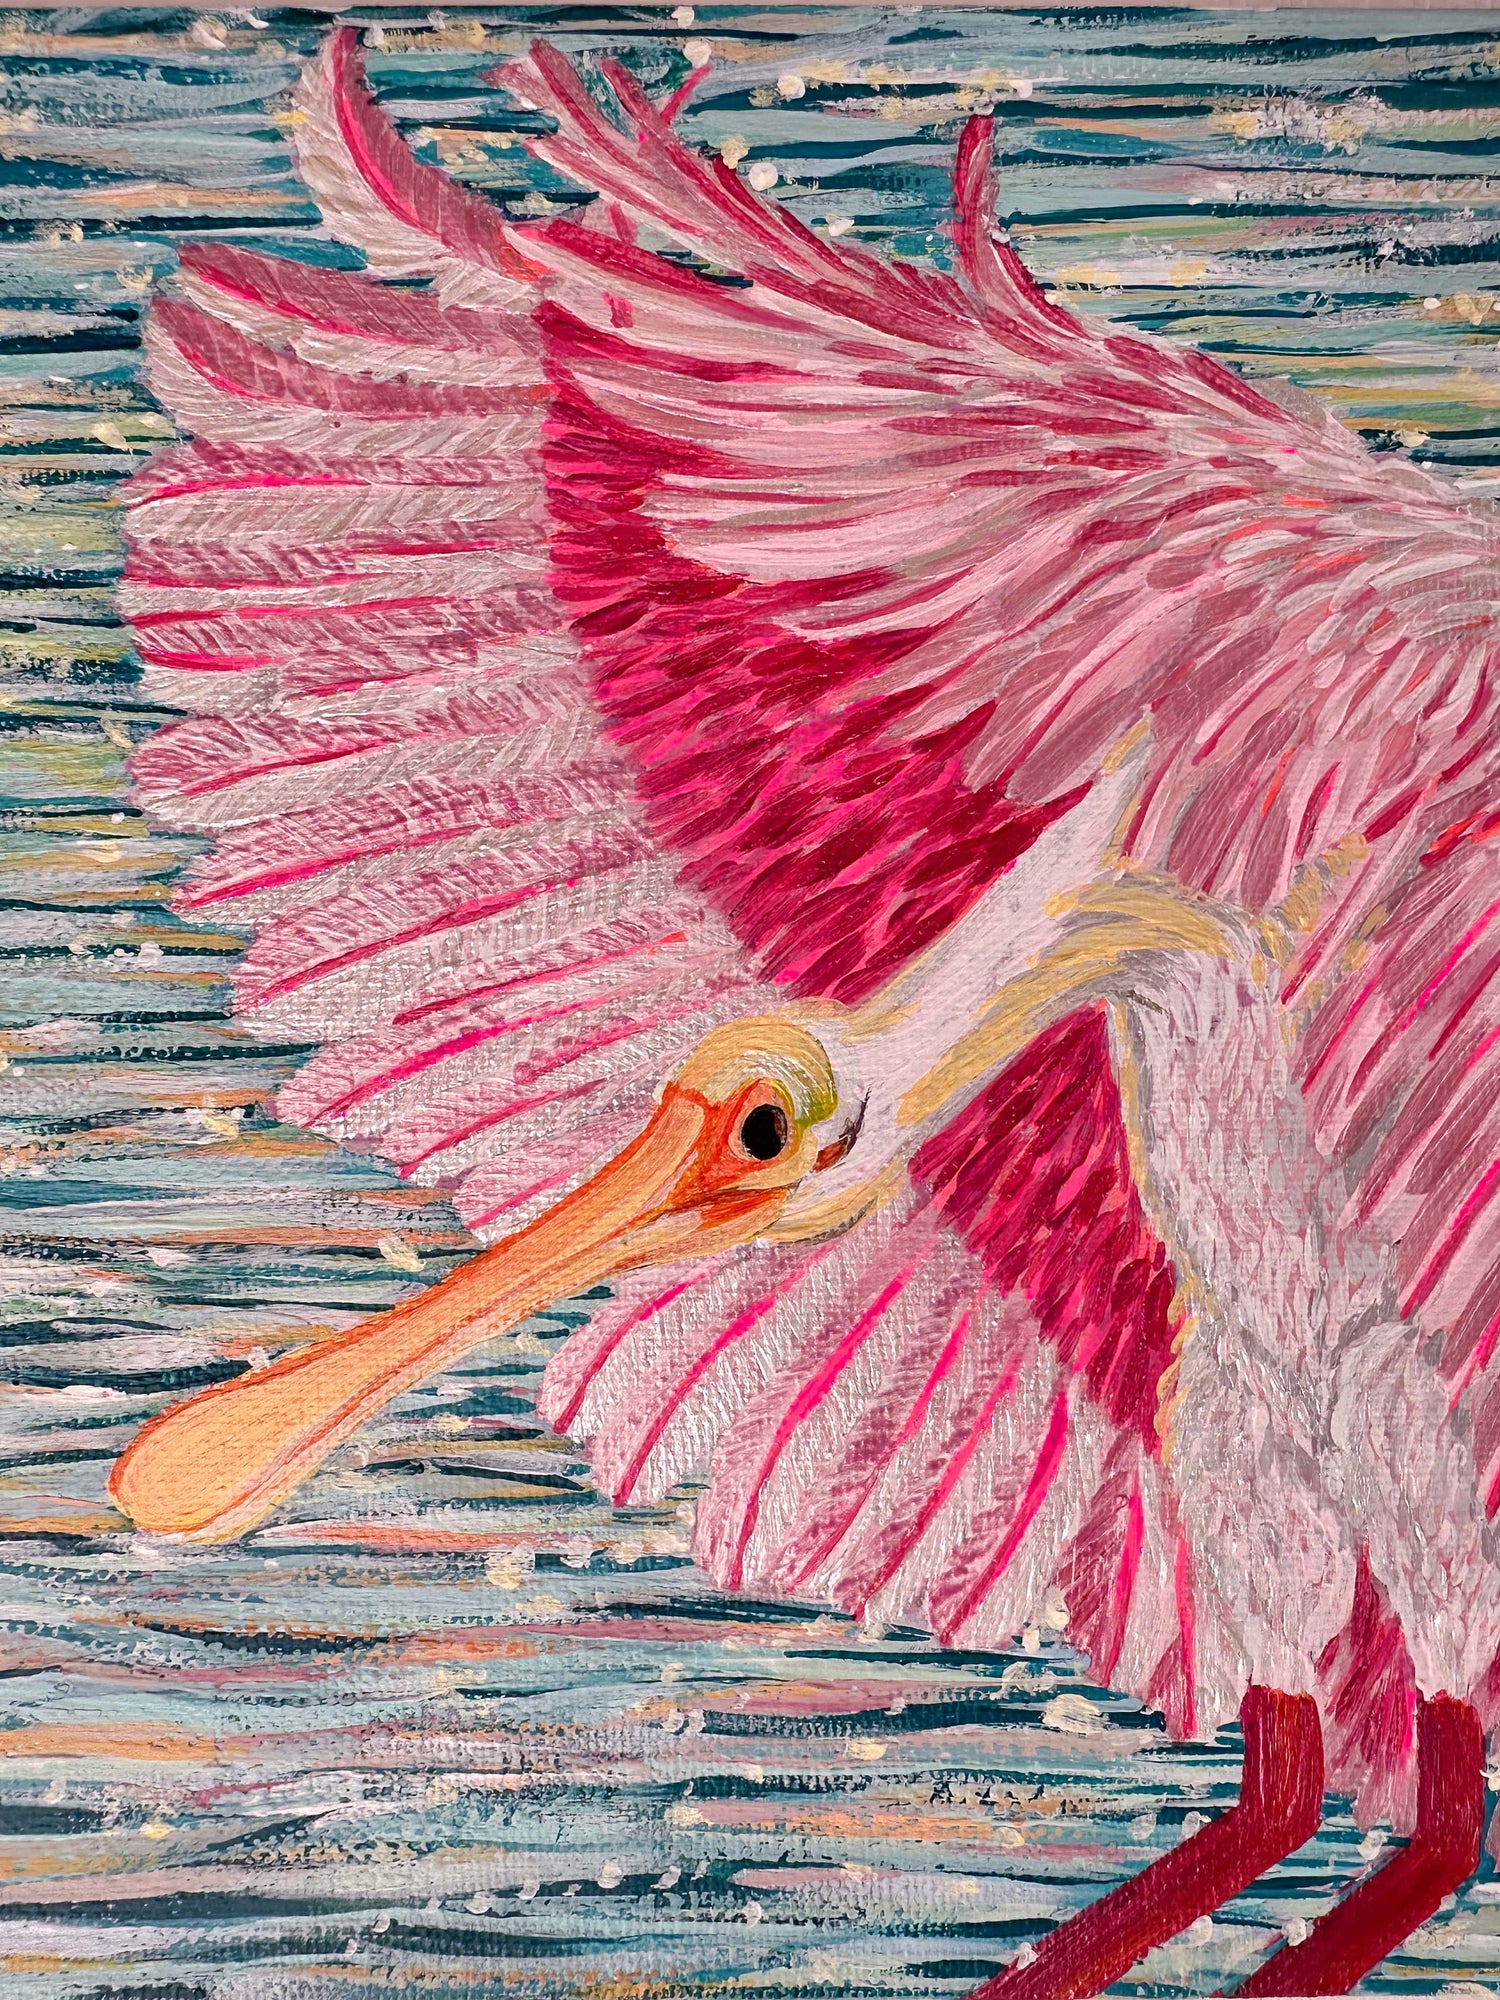 Roseate Spoonbill Contemporary Acrylic on Canvas Painting Acrylic on Canvas, 8” x 8” HELLO MISS E. 